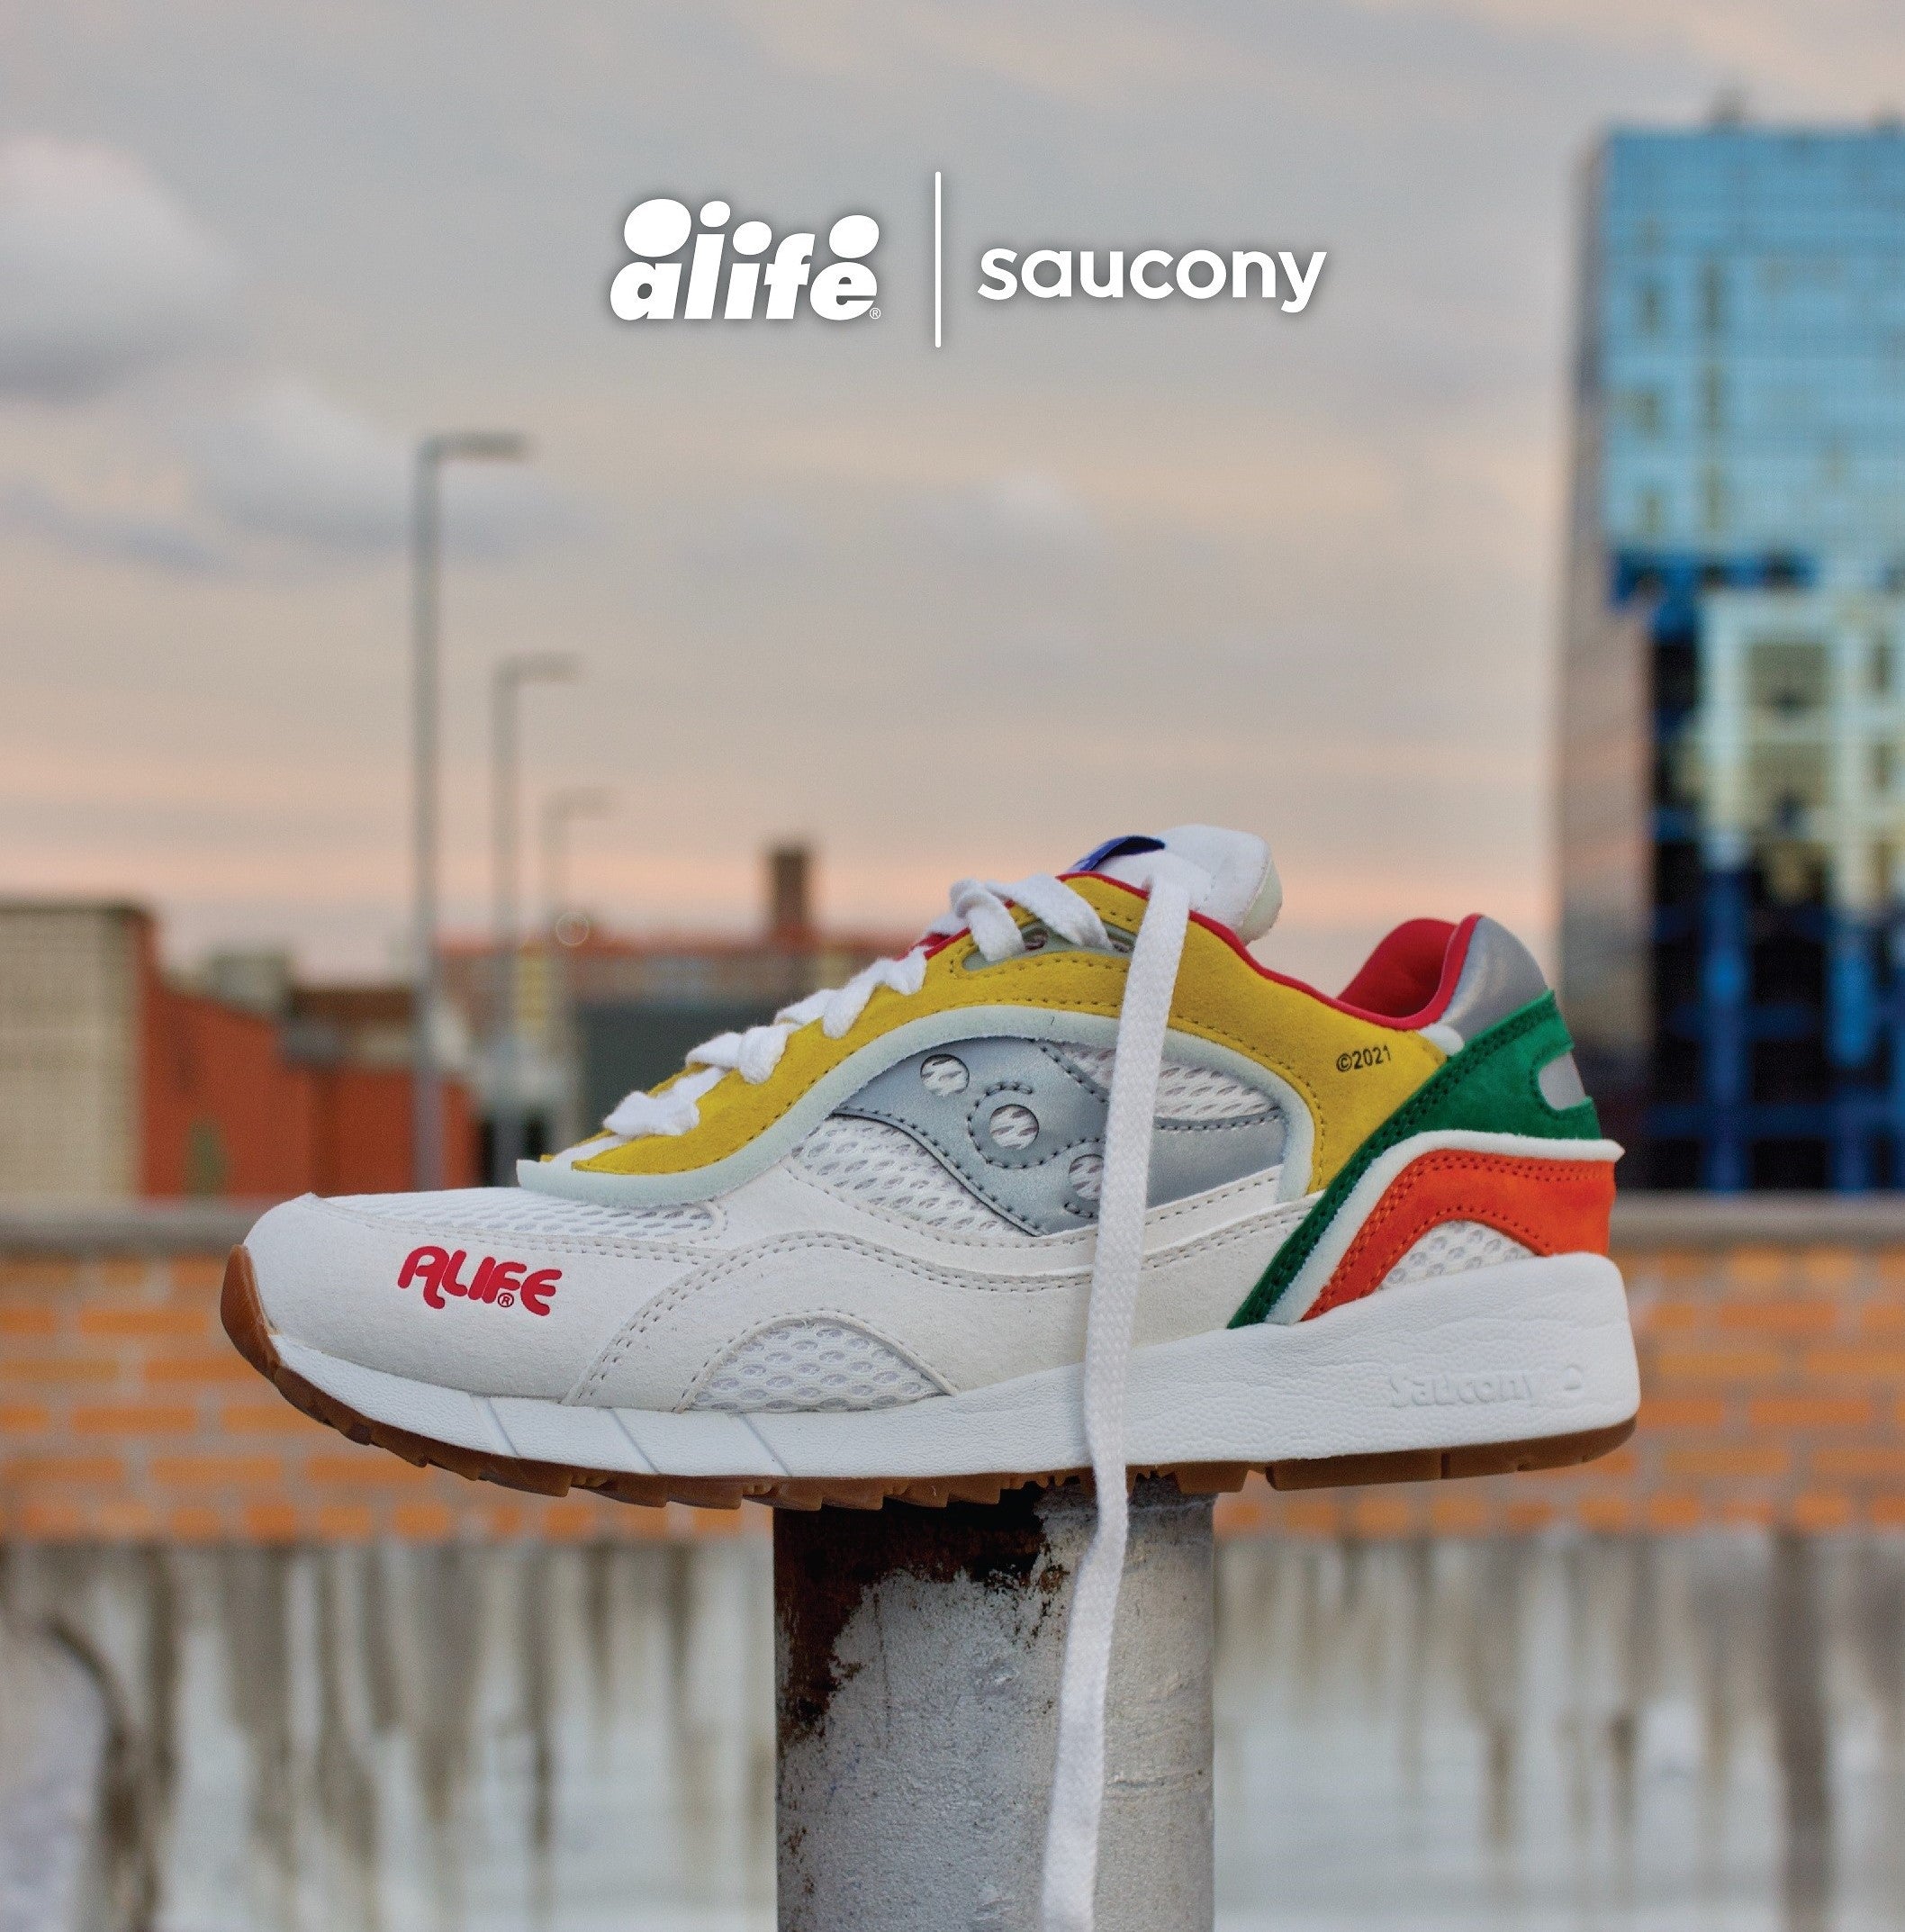 ALIFE x Saucony Shadow 6000 - Alife makes a classic.